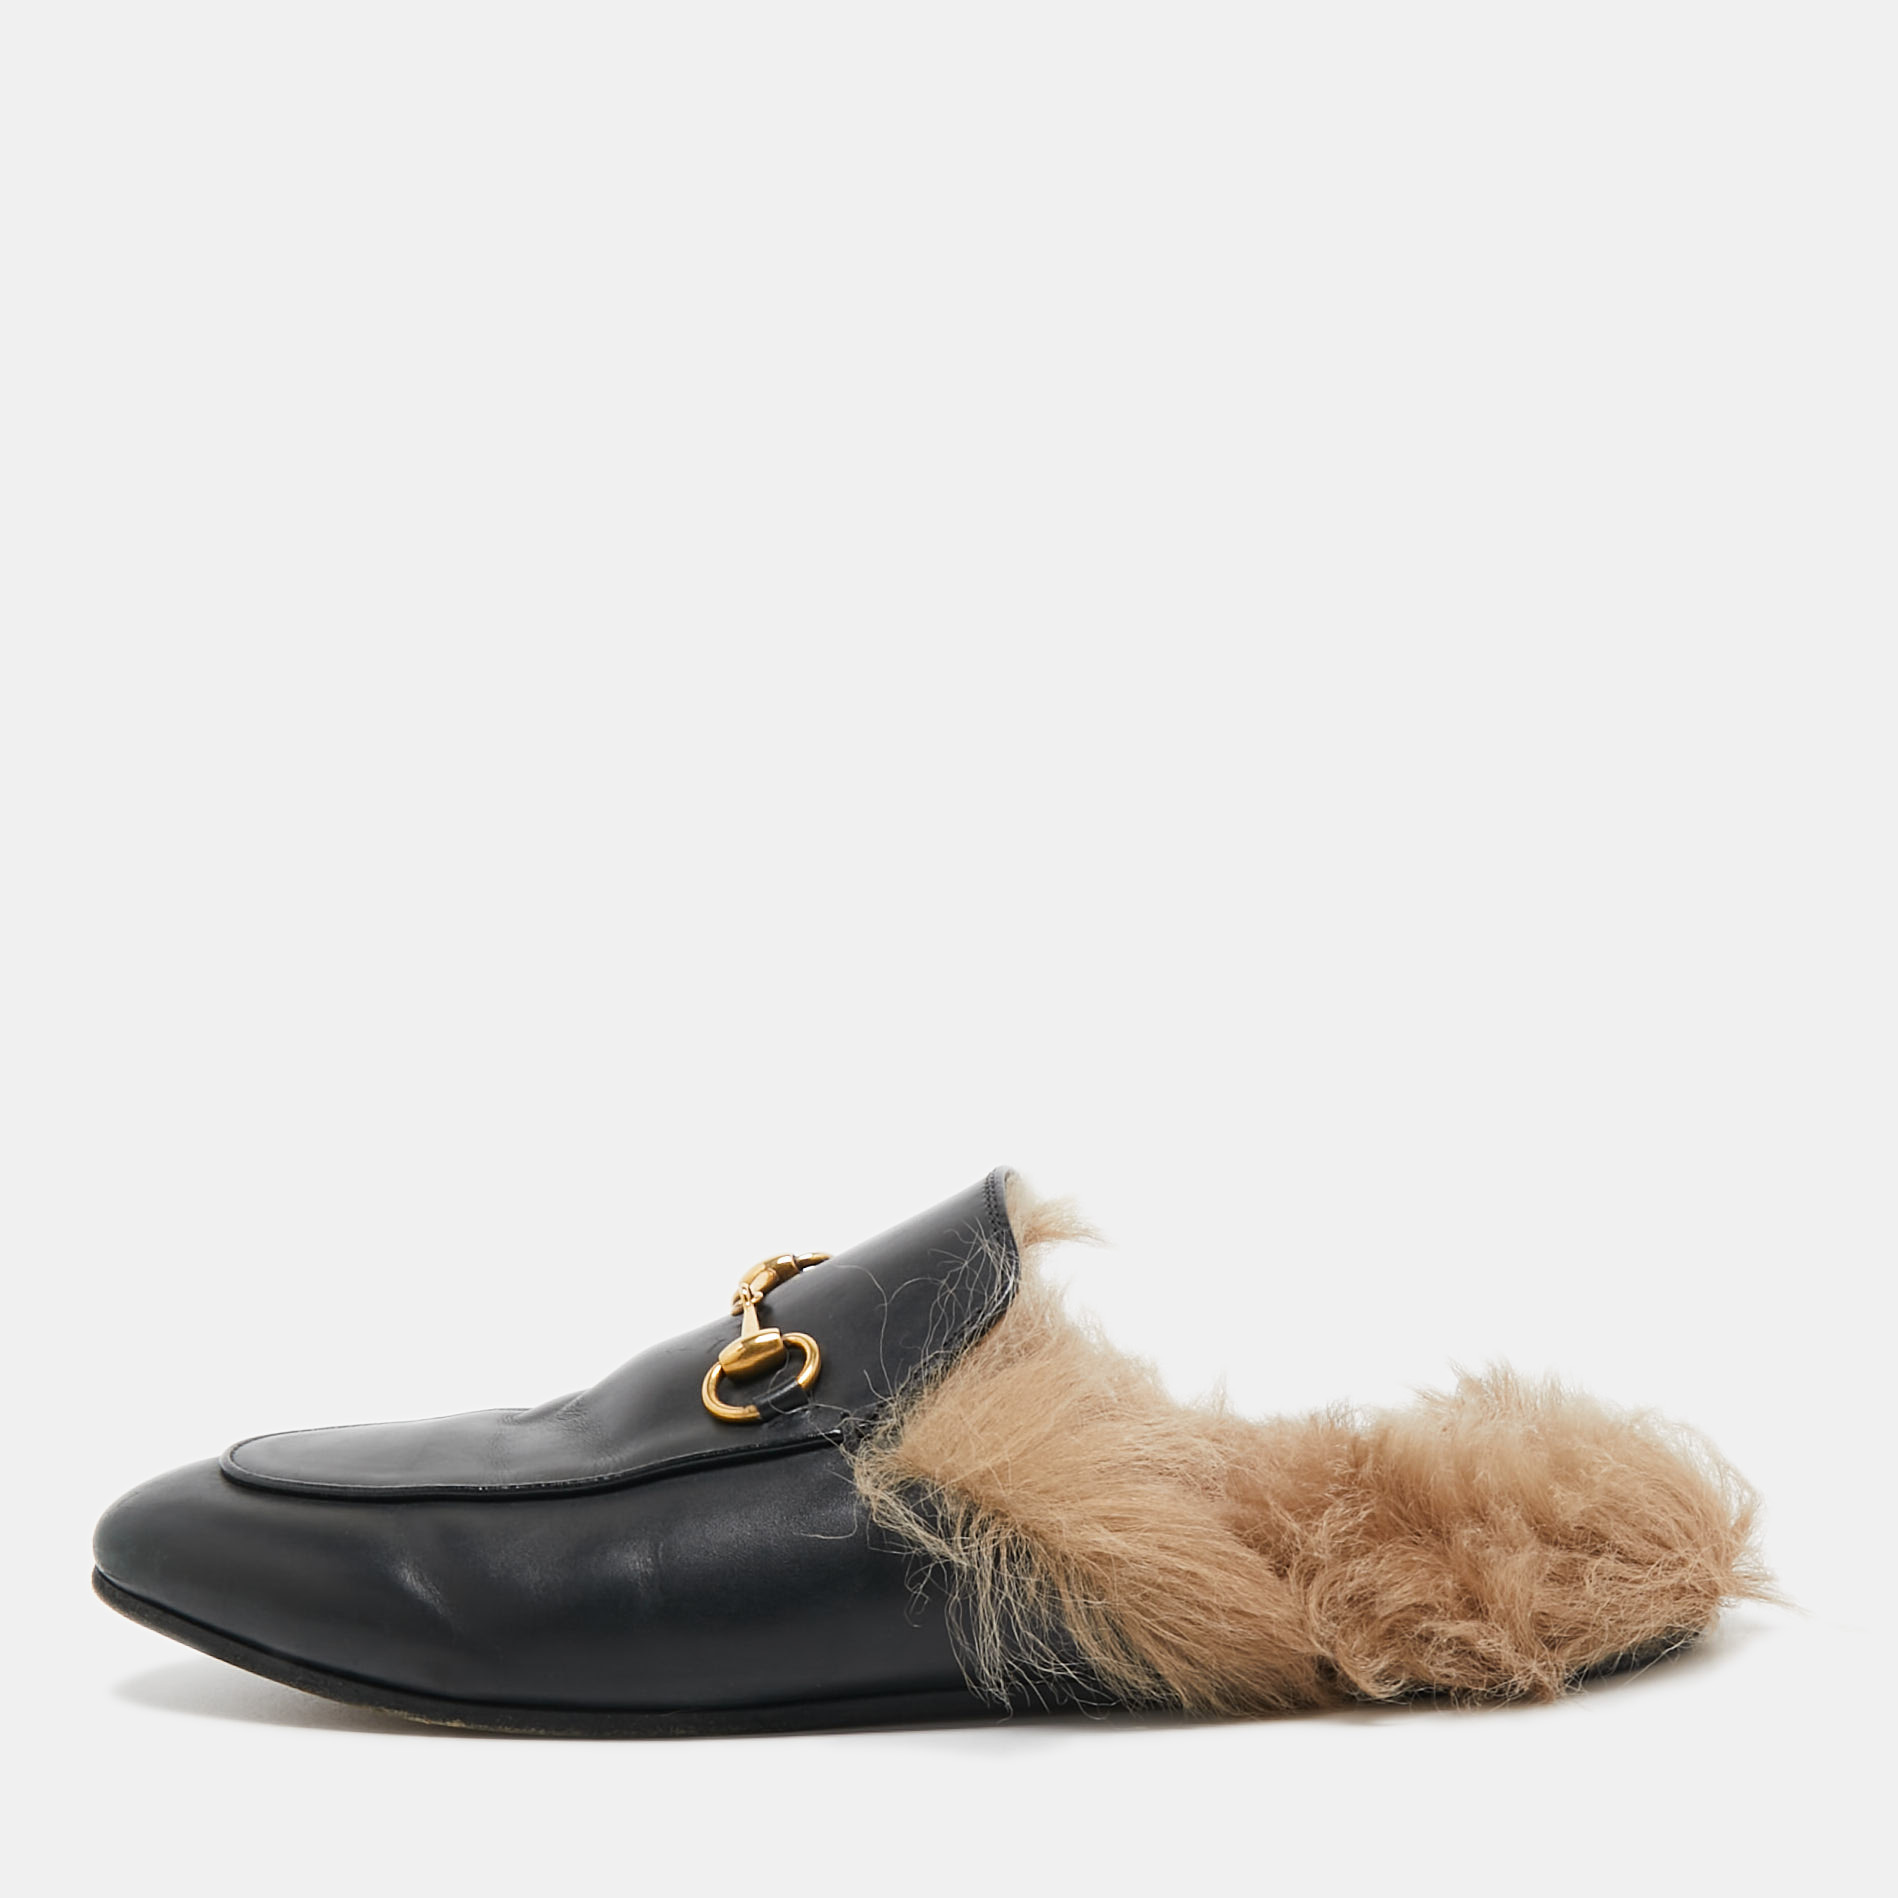 Gucci Black Leather And Fur Princetown Mules Size 39